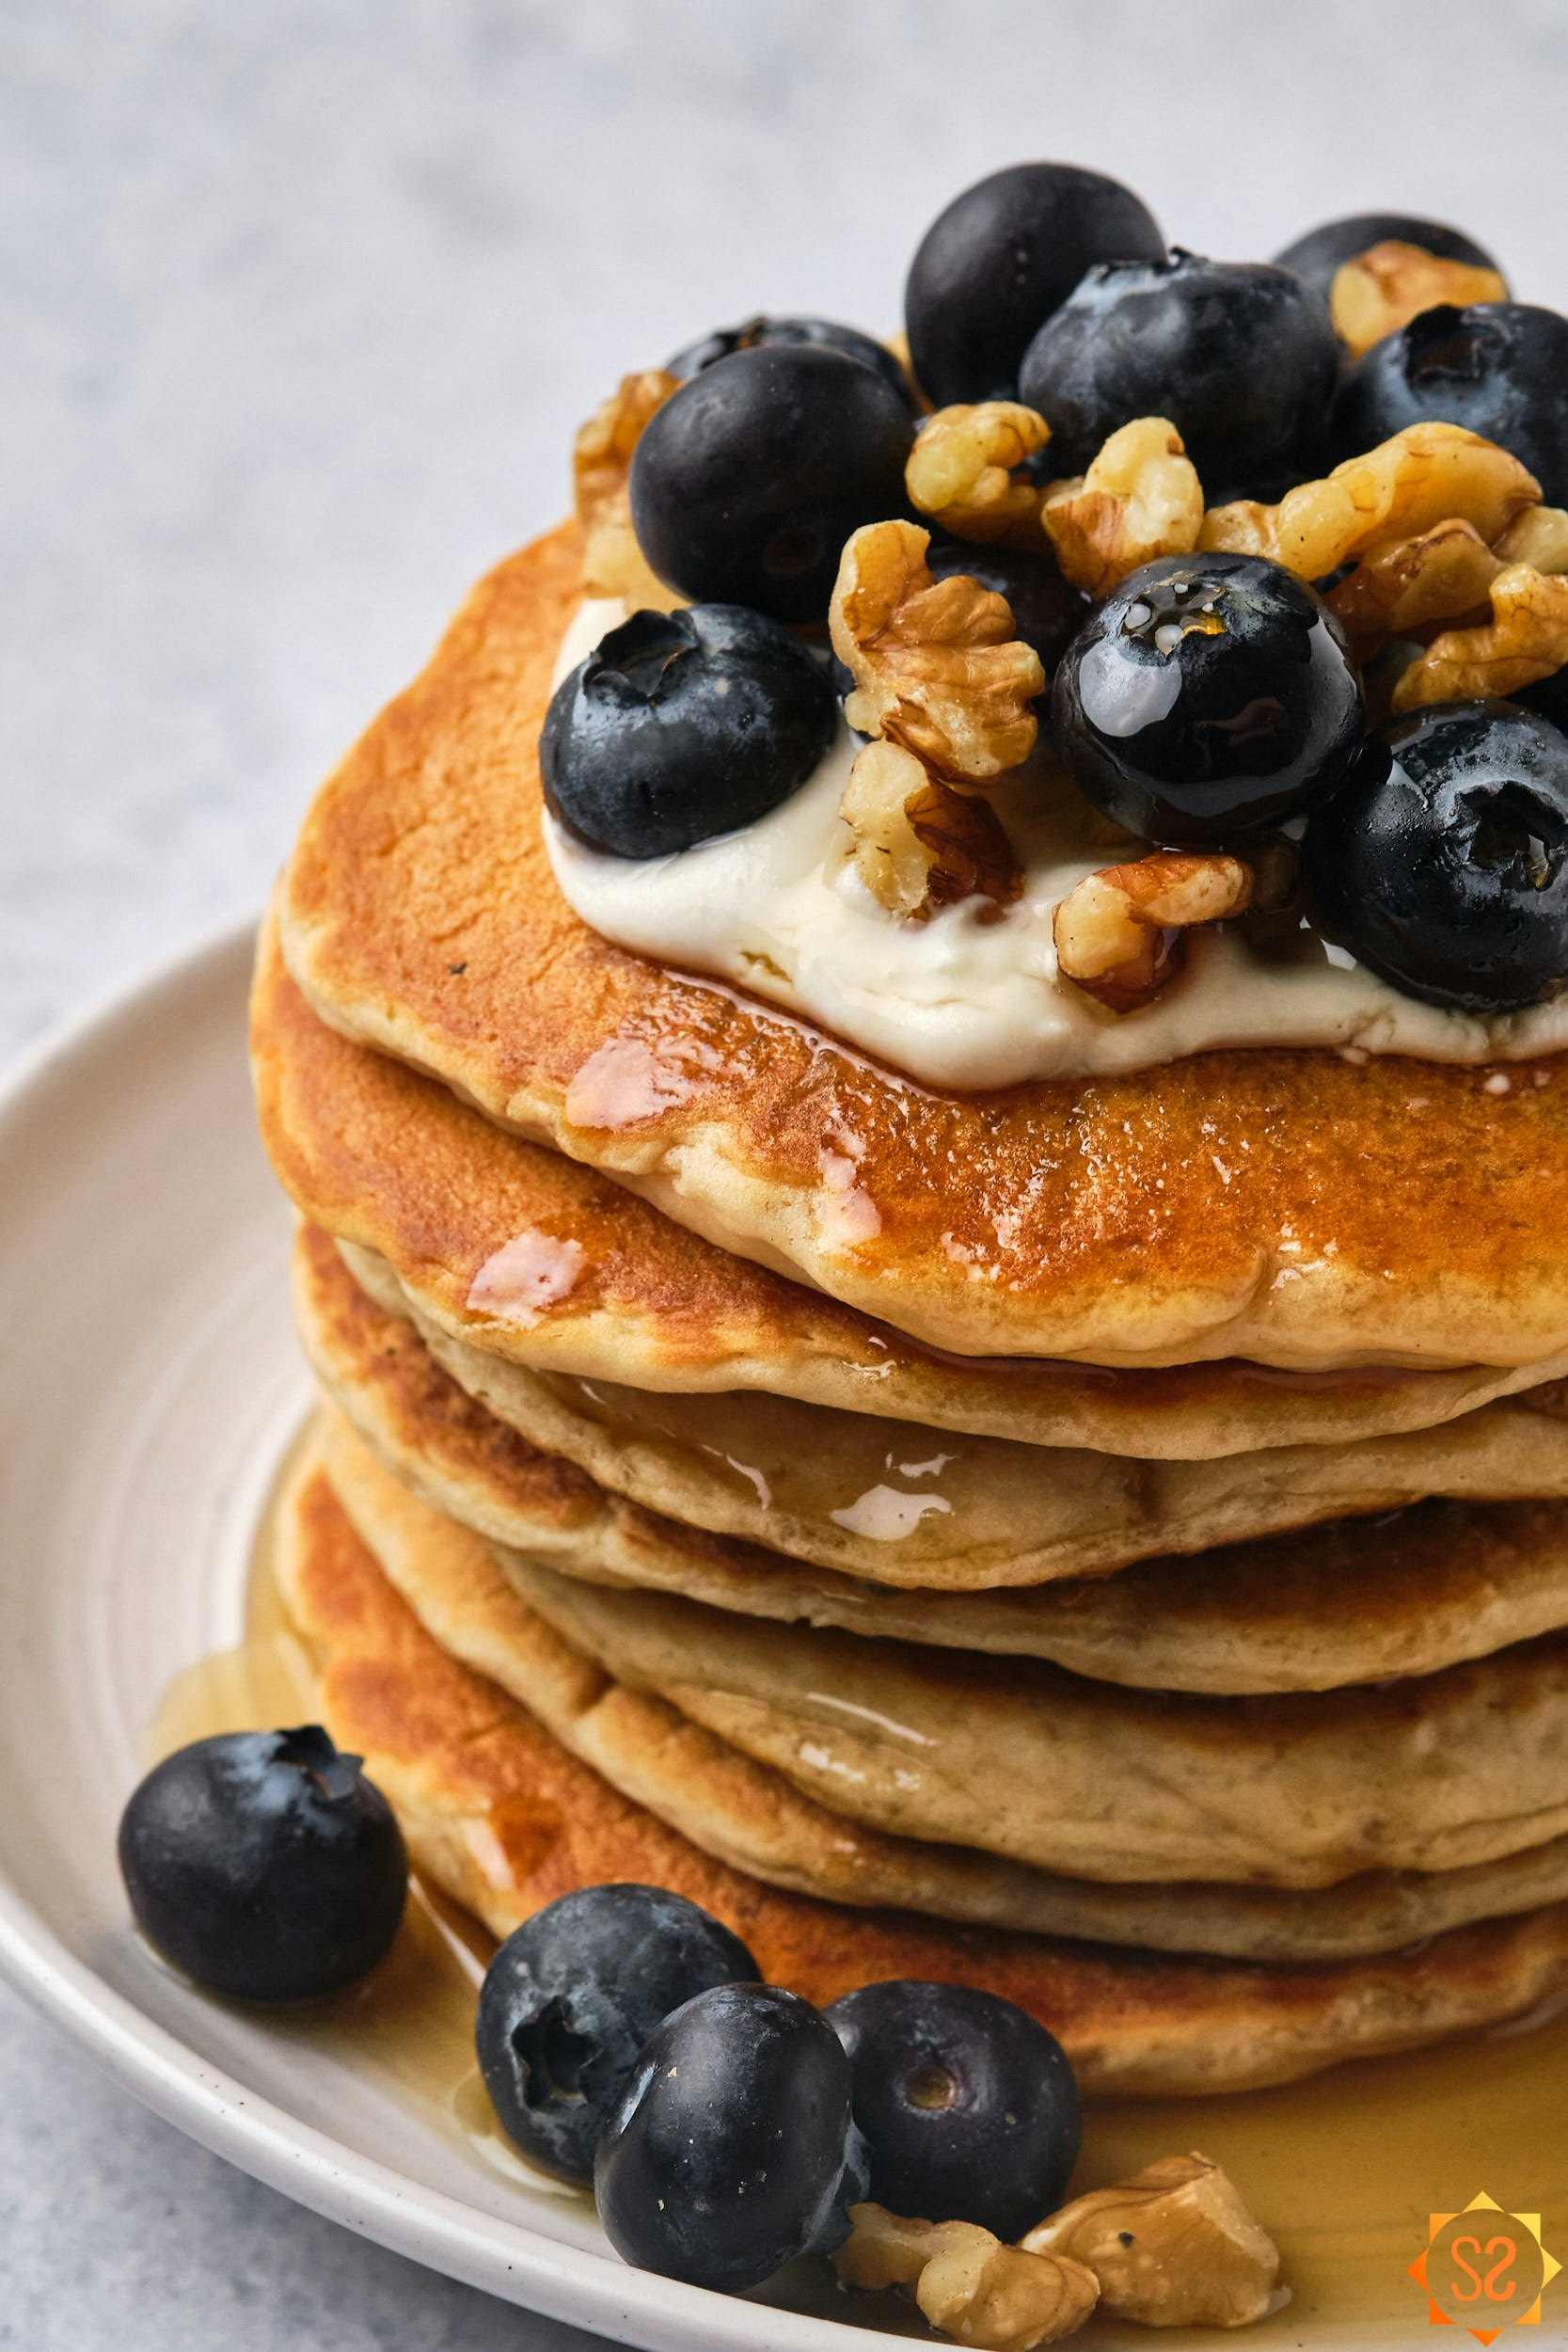 A close up view of a stack of vegan protein pancakes showing the toppings: cashew cream, blueberries, walnuts, maple syrup.